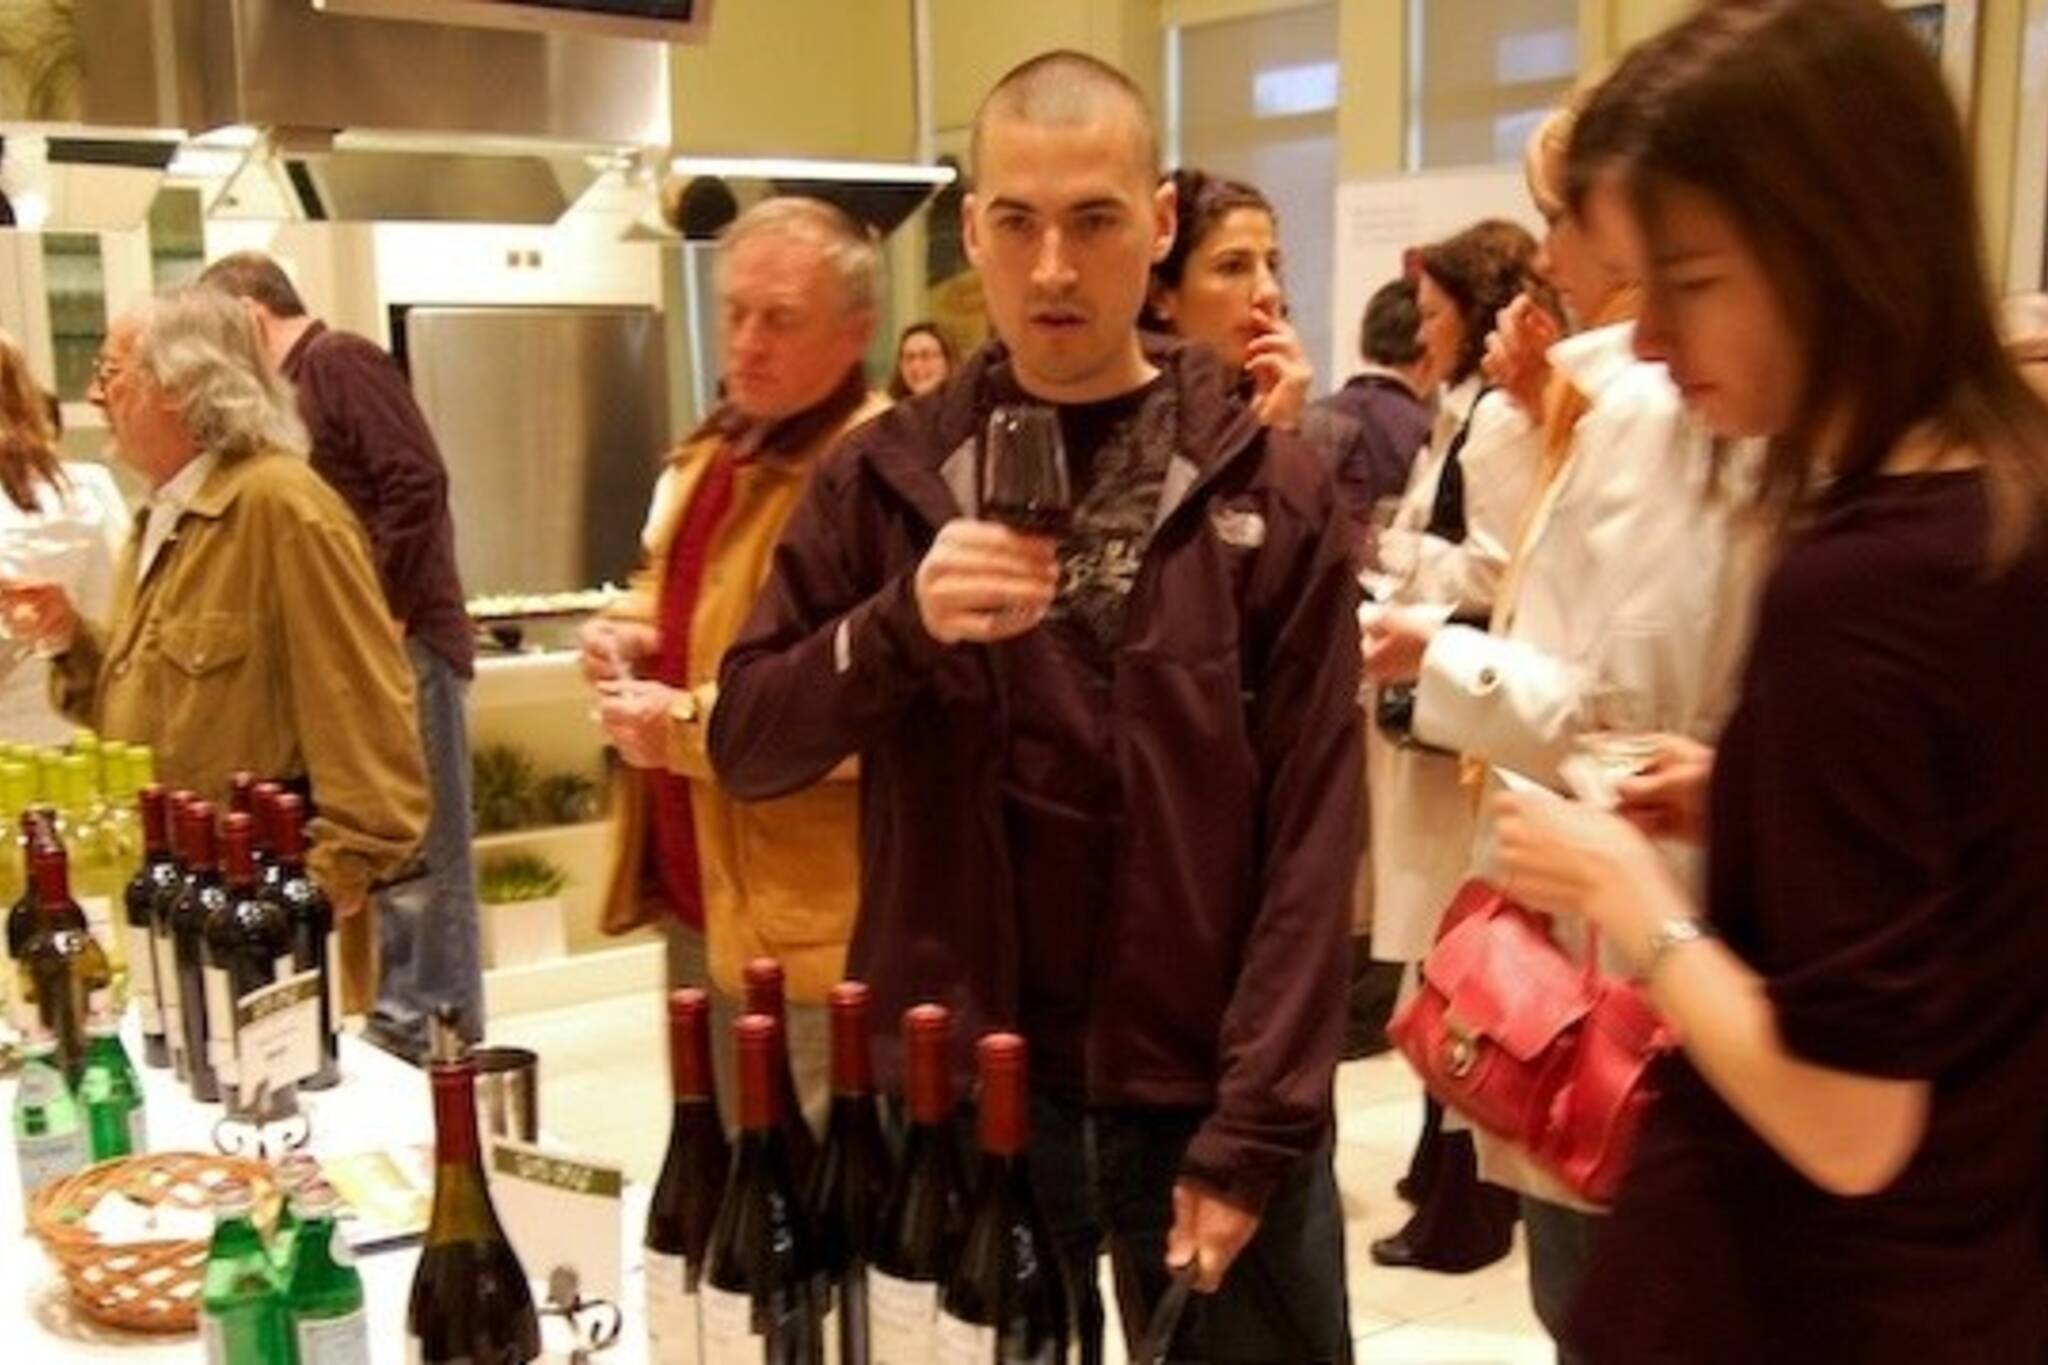 The crowd at the Sante wine sampling